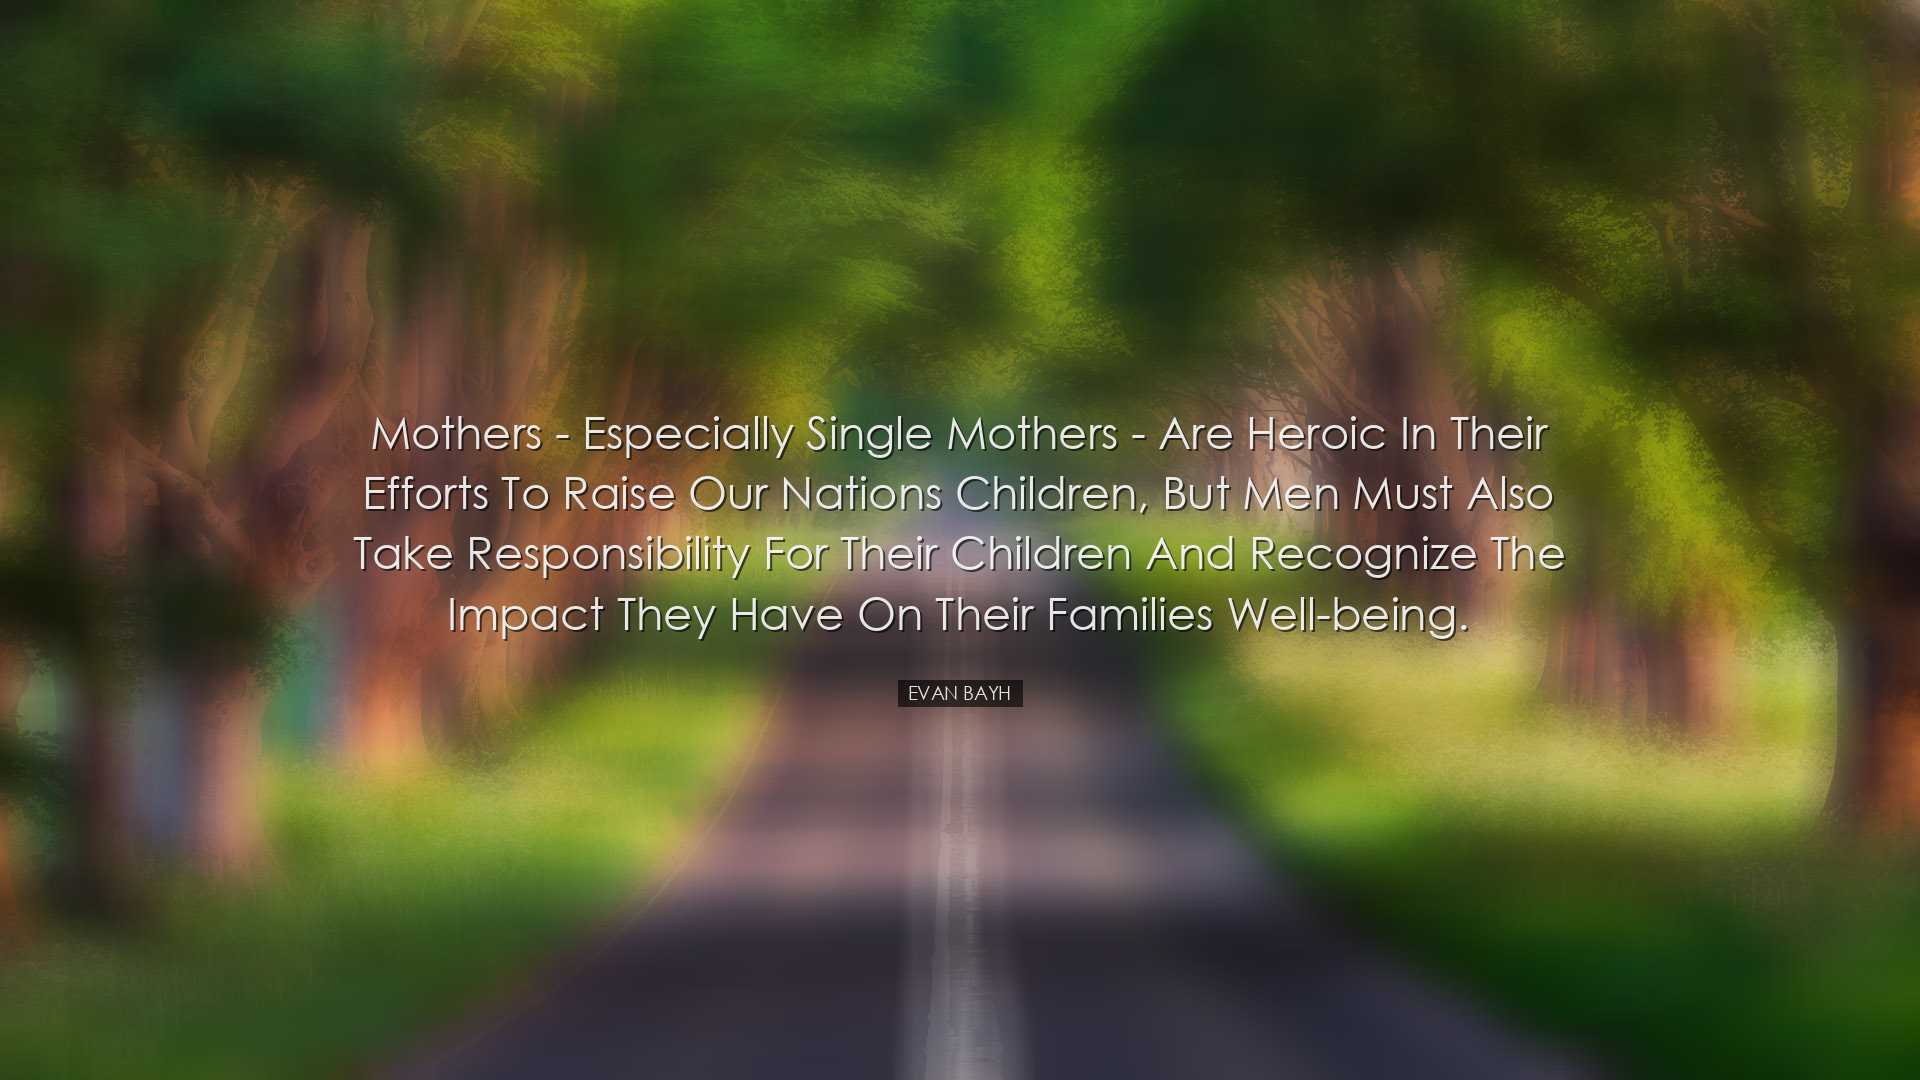 Mothers - especially single mothers - are heroic in their efforts